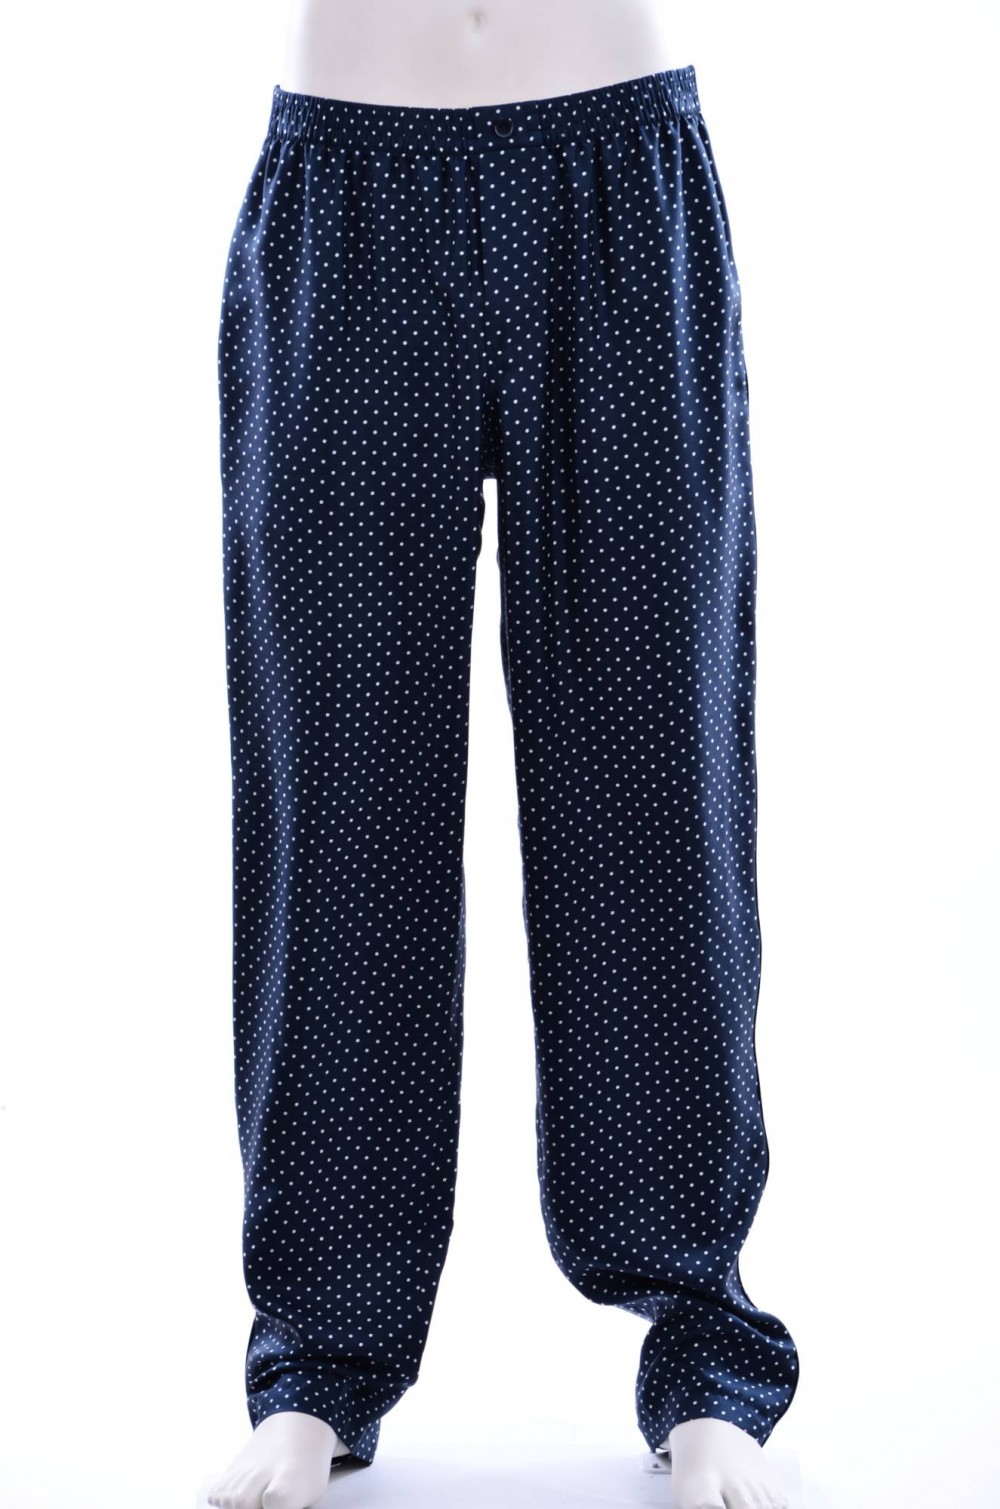 dolce and gabbana mens trousers